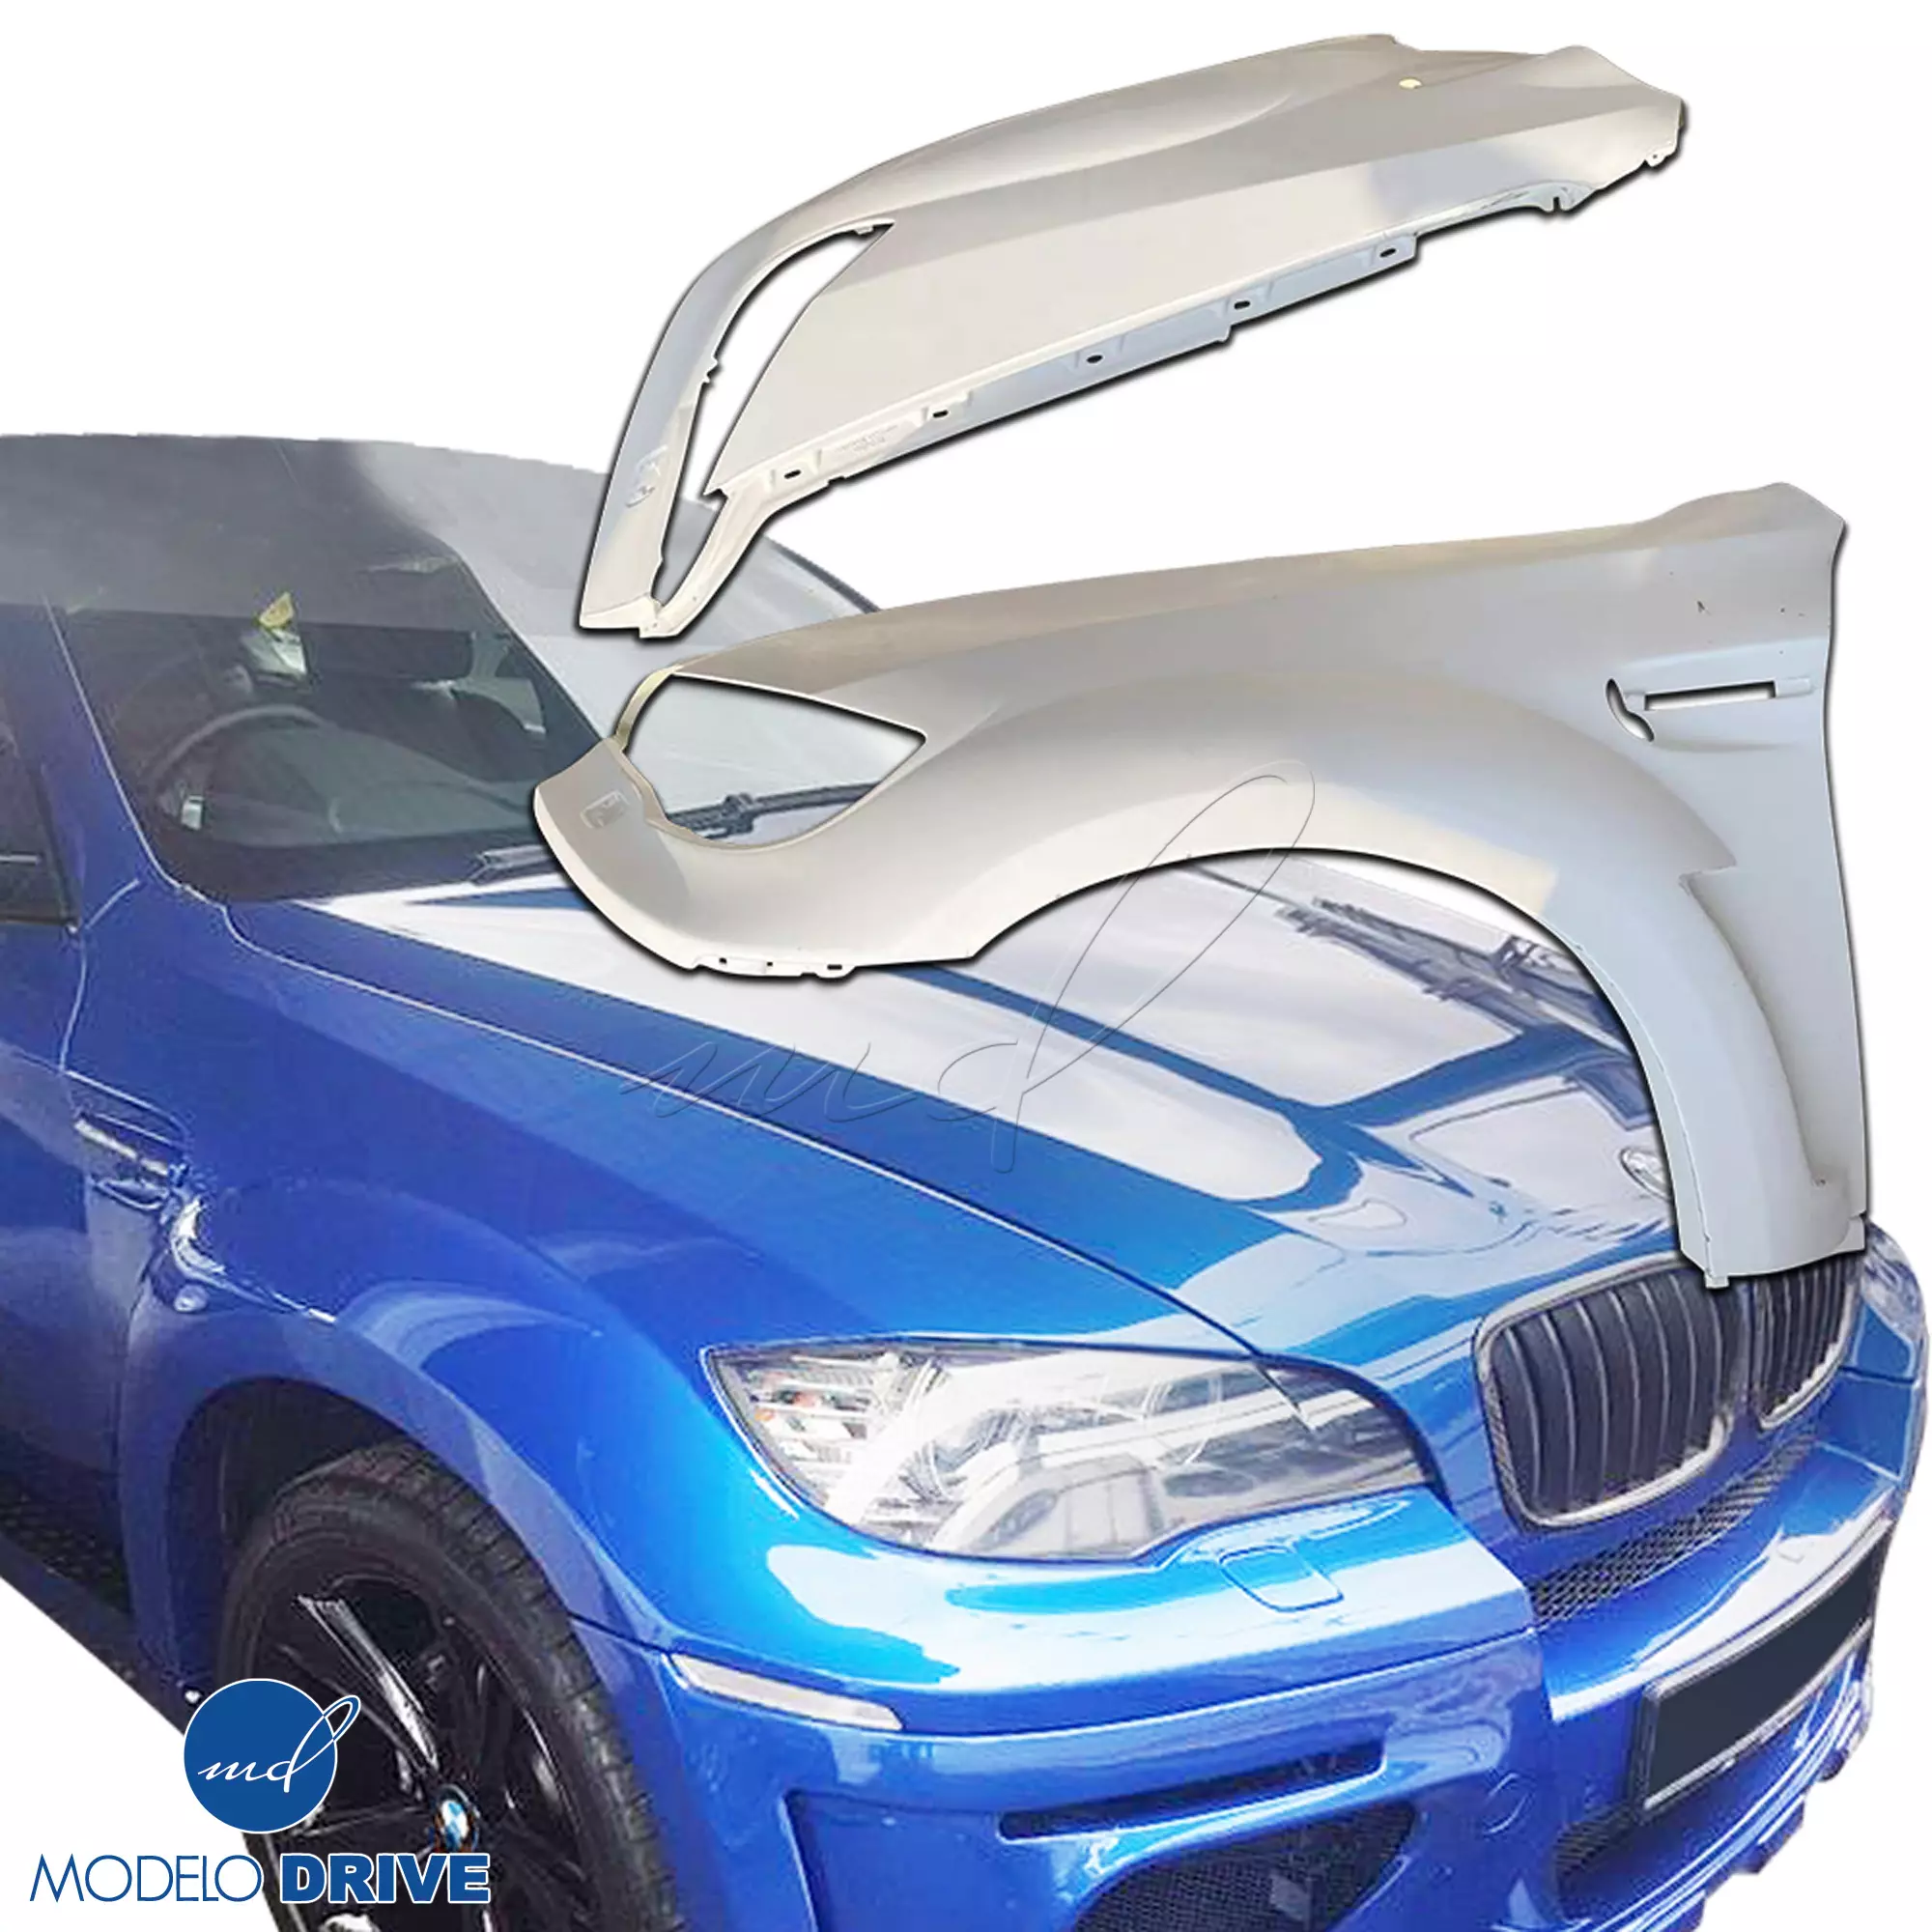 ModeloDrive FRP HAMA Wide Body Fenders (front) 2pc > BMW X6 E71 2008-2014 - Image 22